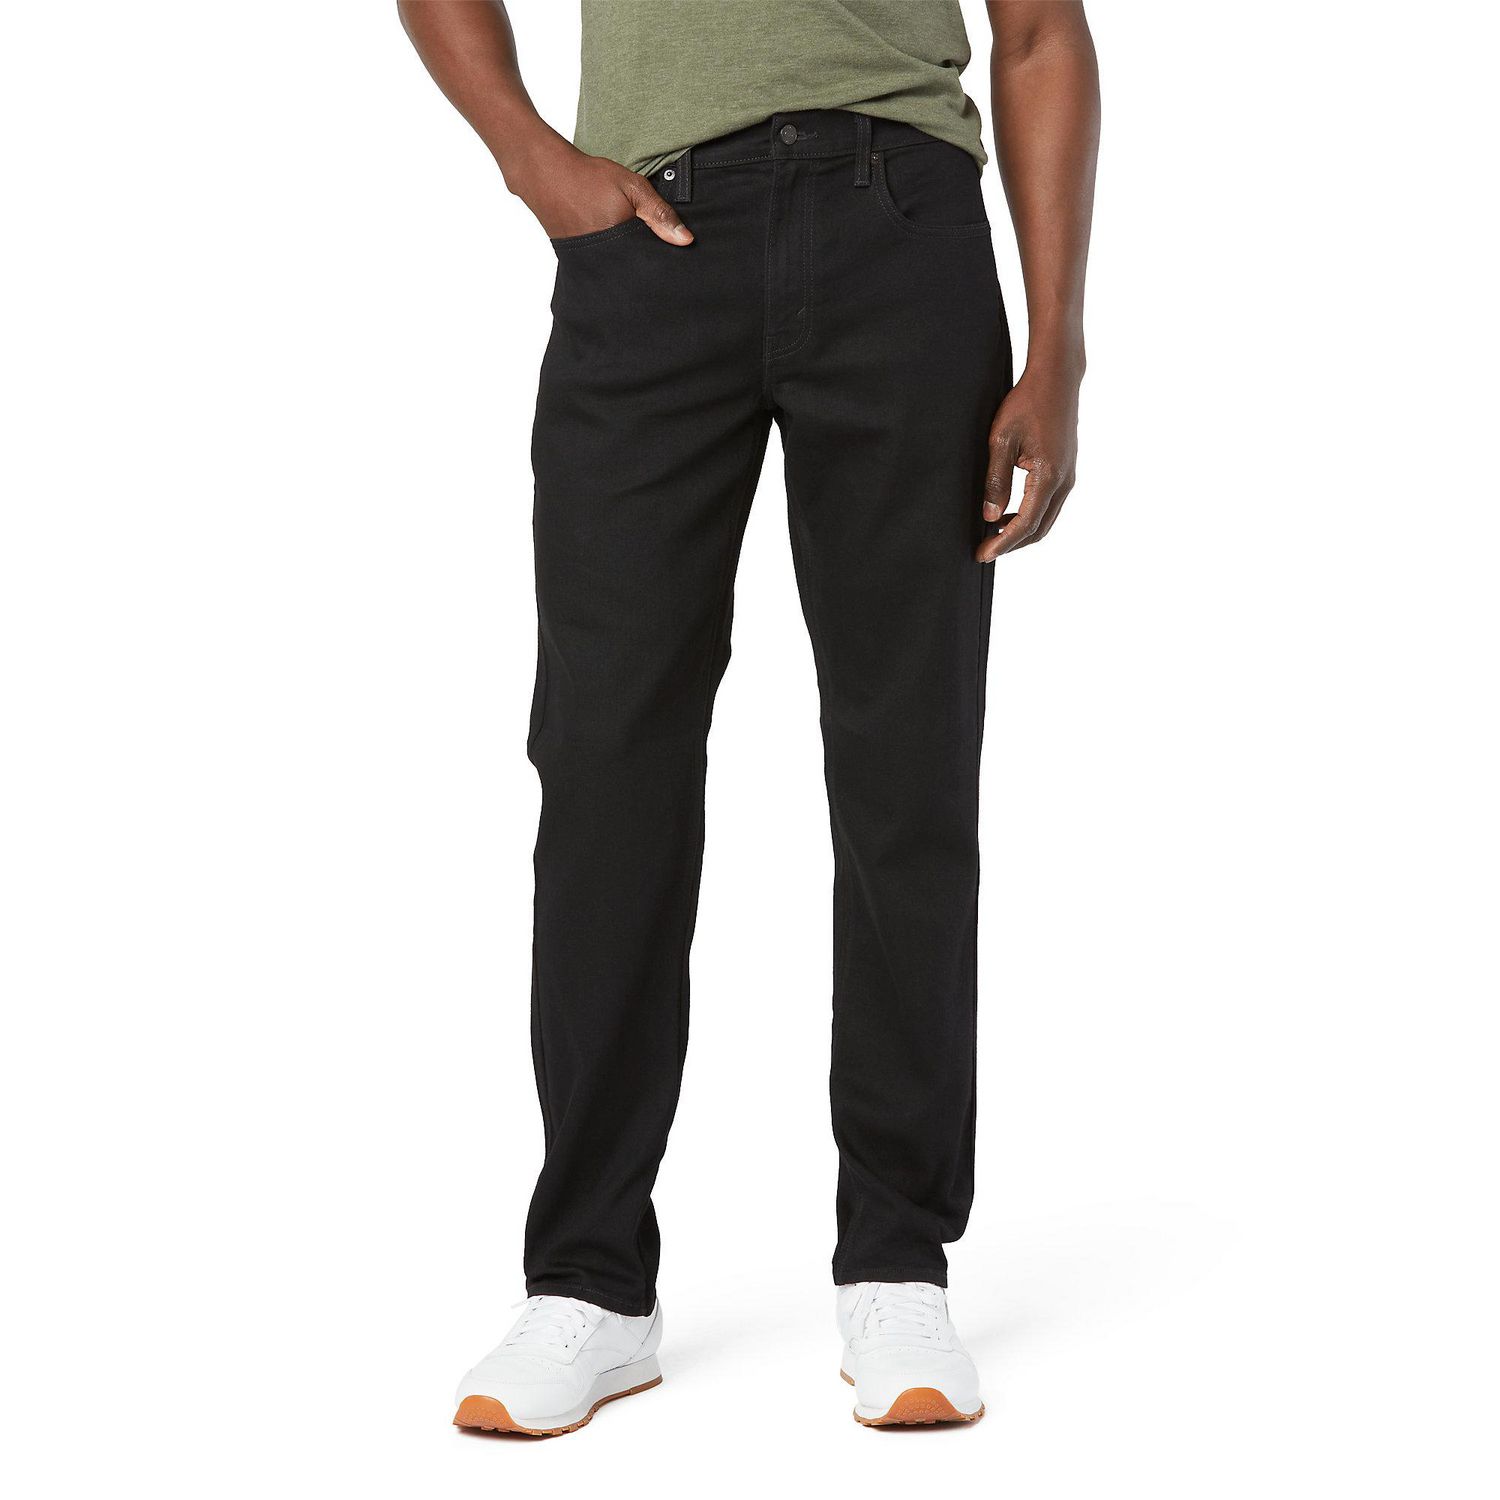 Signature by Levi Strauss & Co.™ Men's S67 Athletic Fit | Walmart Canada